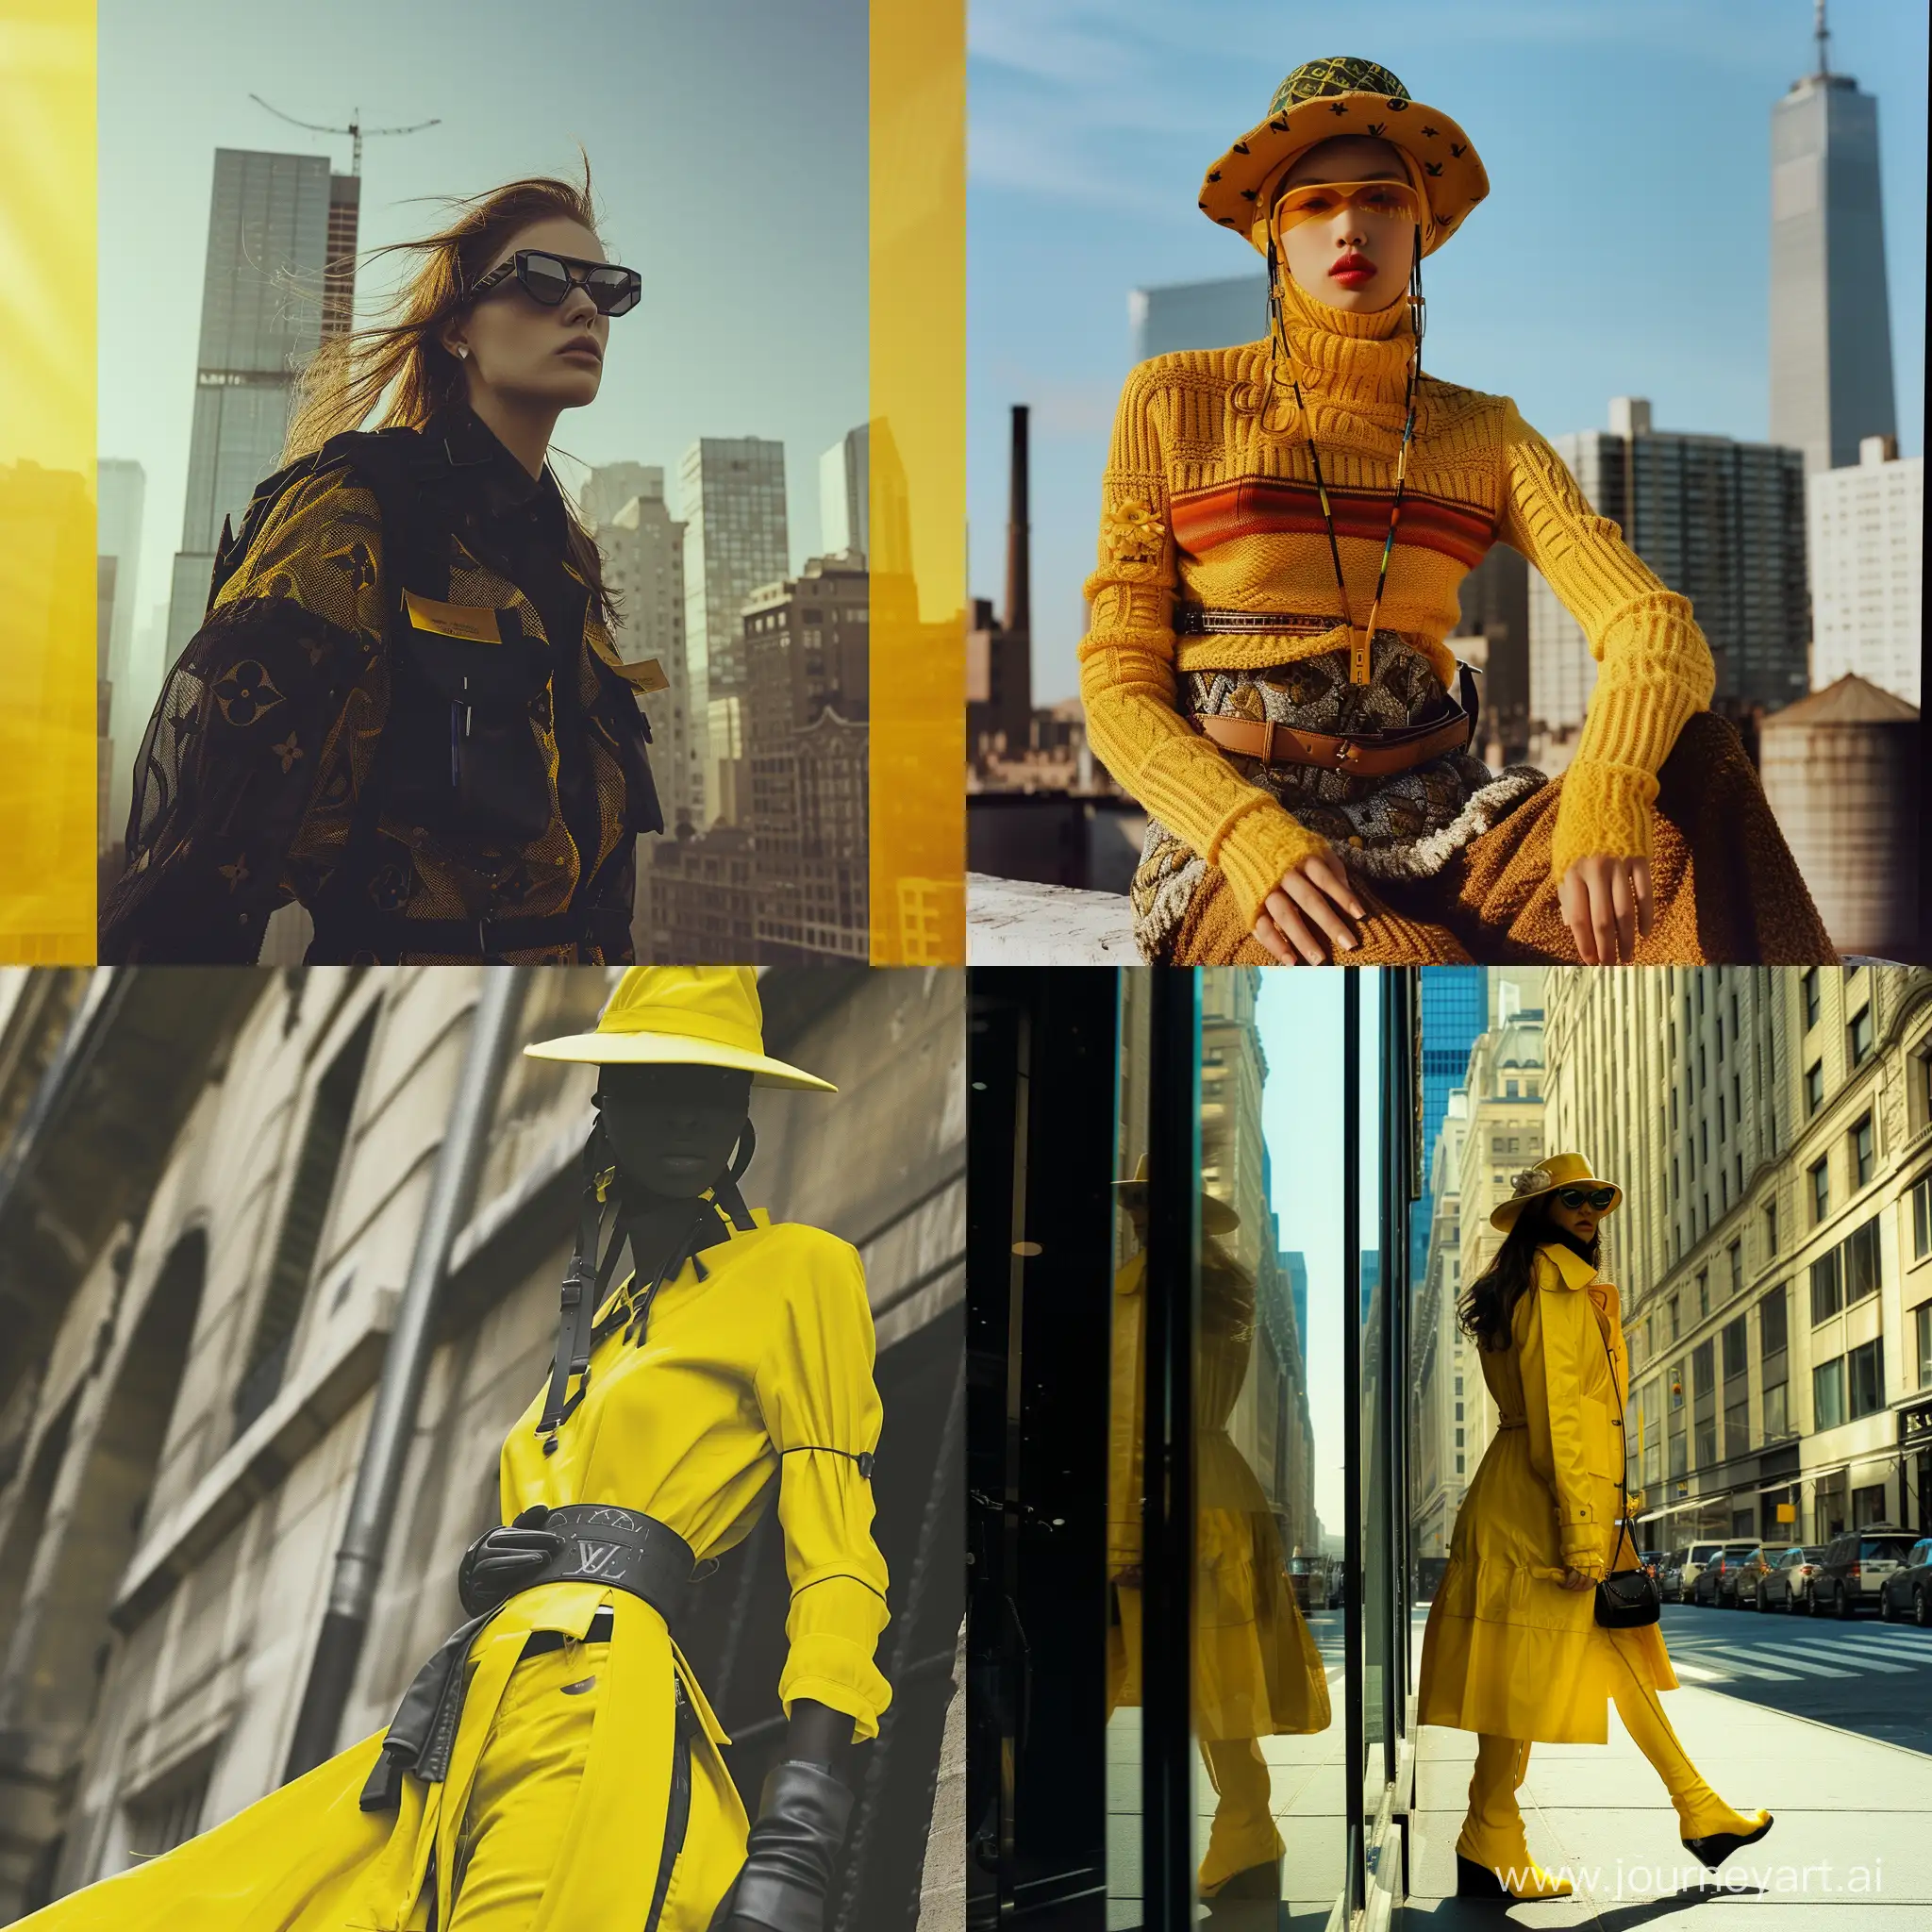 Luxurious-Louis-Vuittoninspired-Fashion-Photography-in-Yellowcore-Cityscape